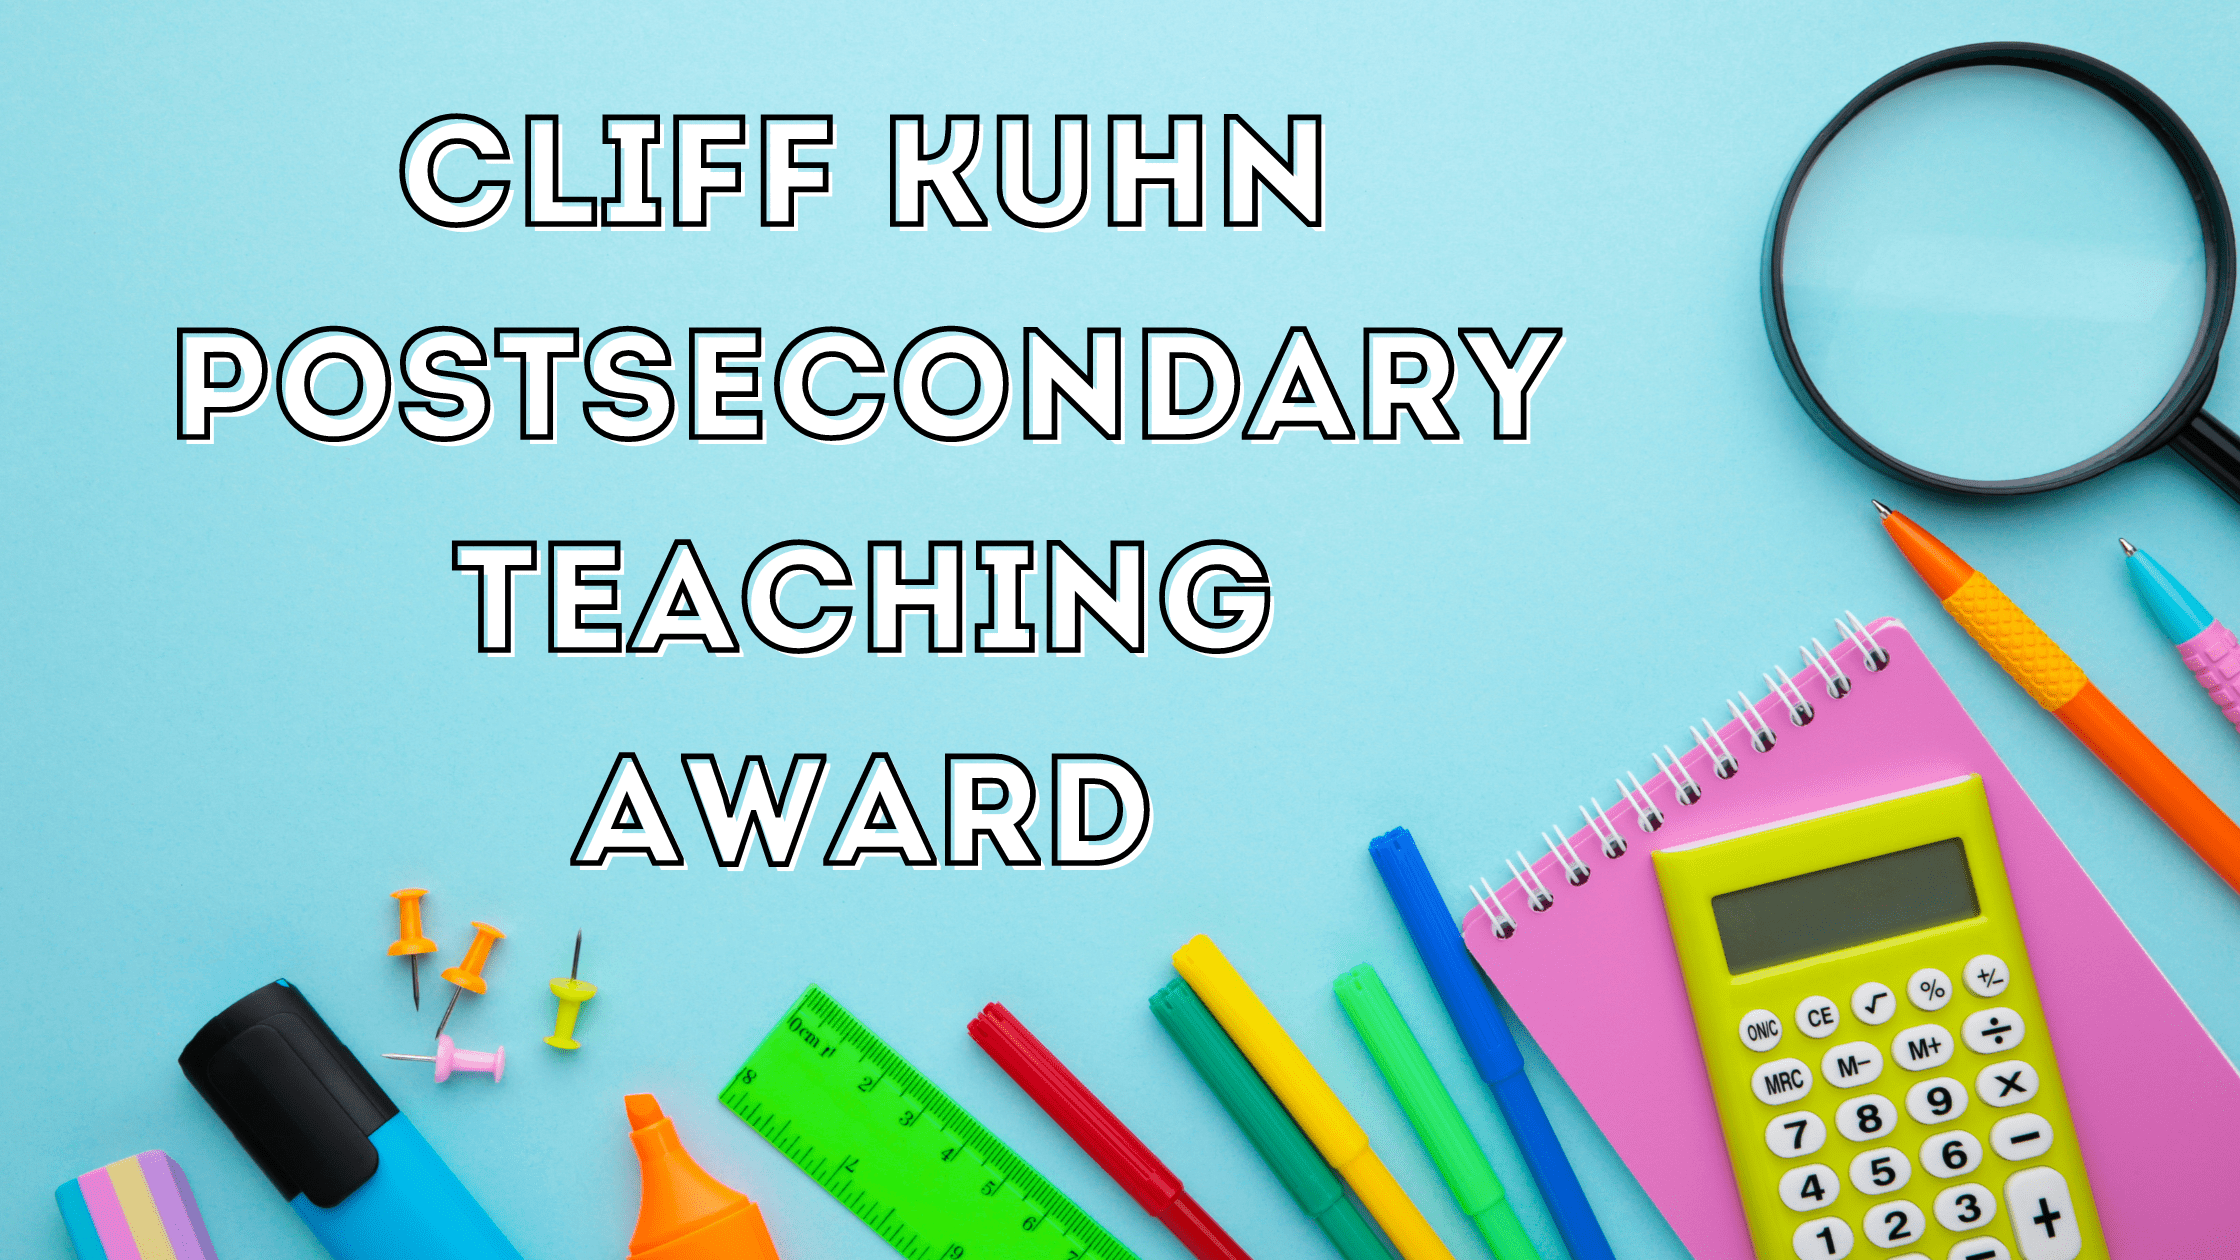 Nominate an Outstanding Educator for the Cliff Kuhn Postsecondary Teaching Award!